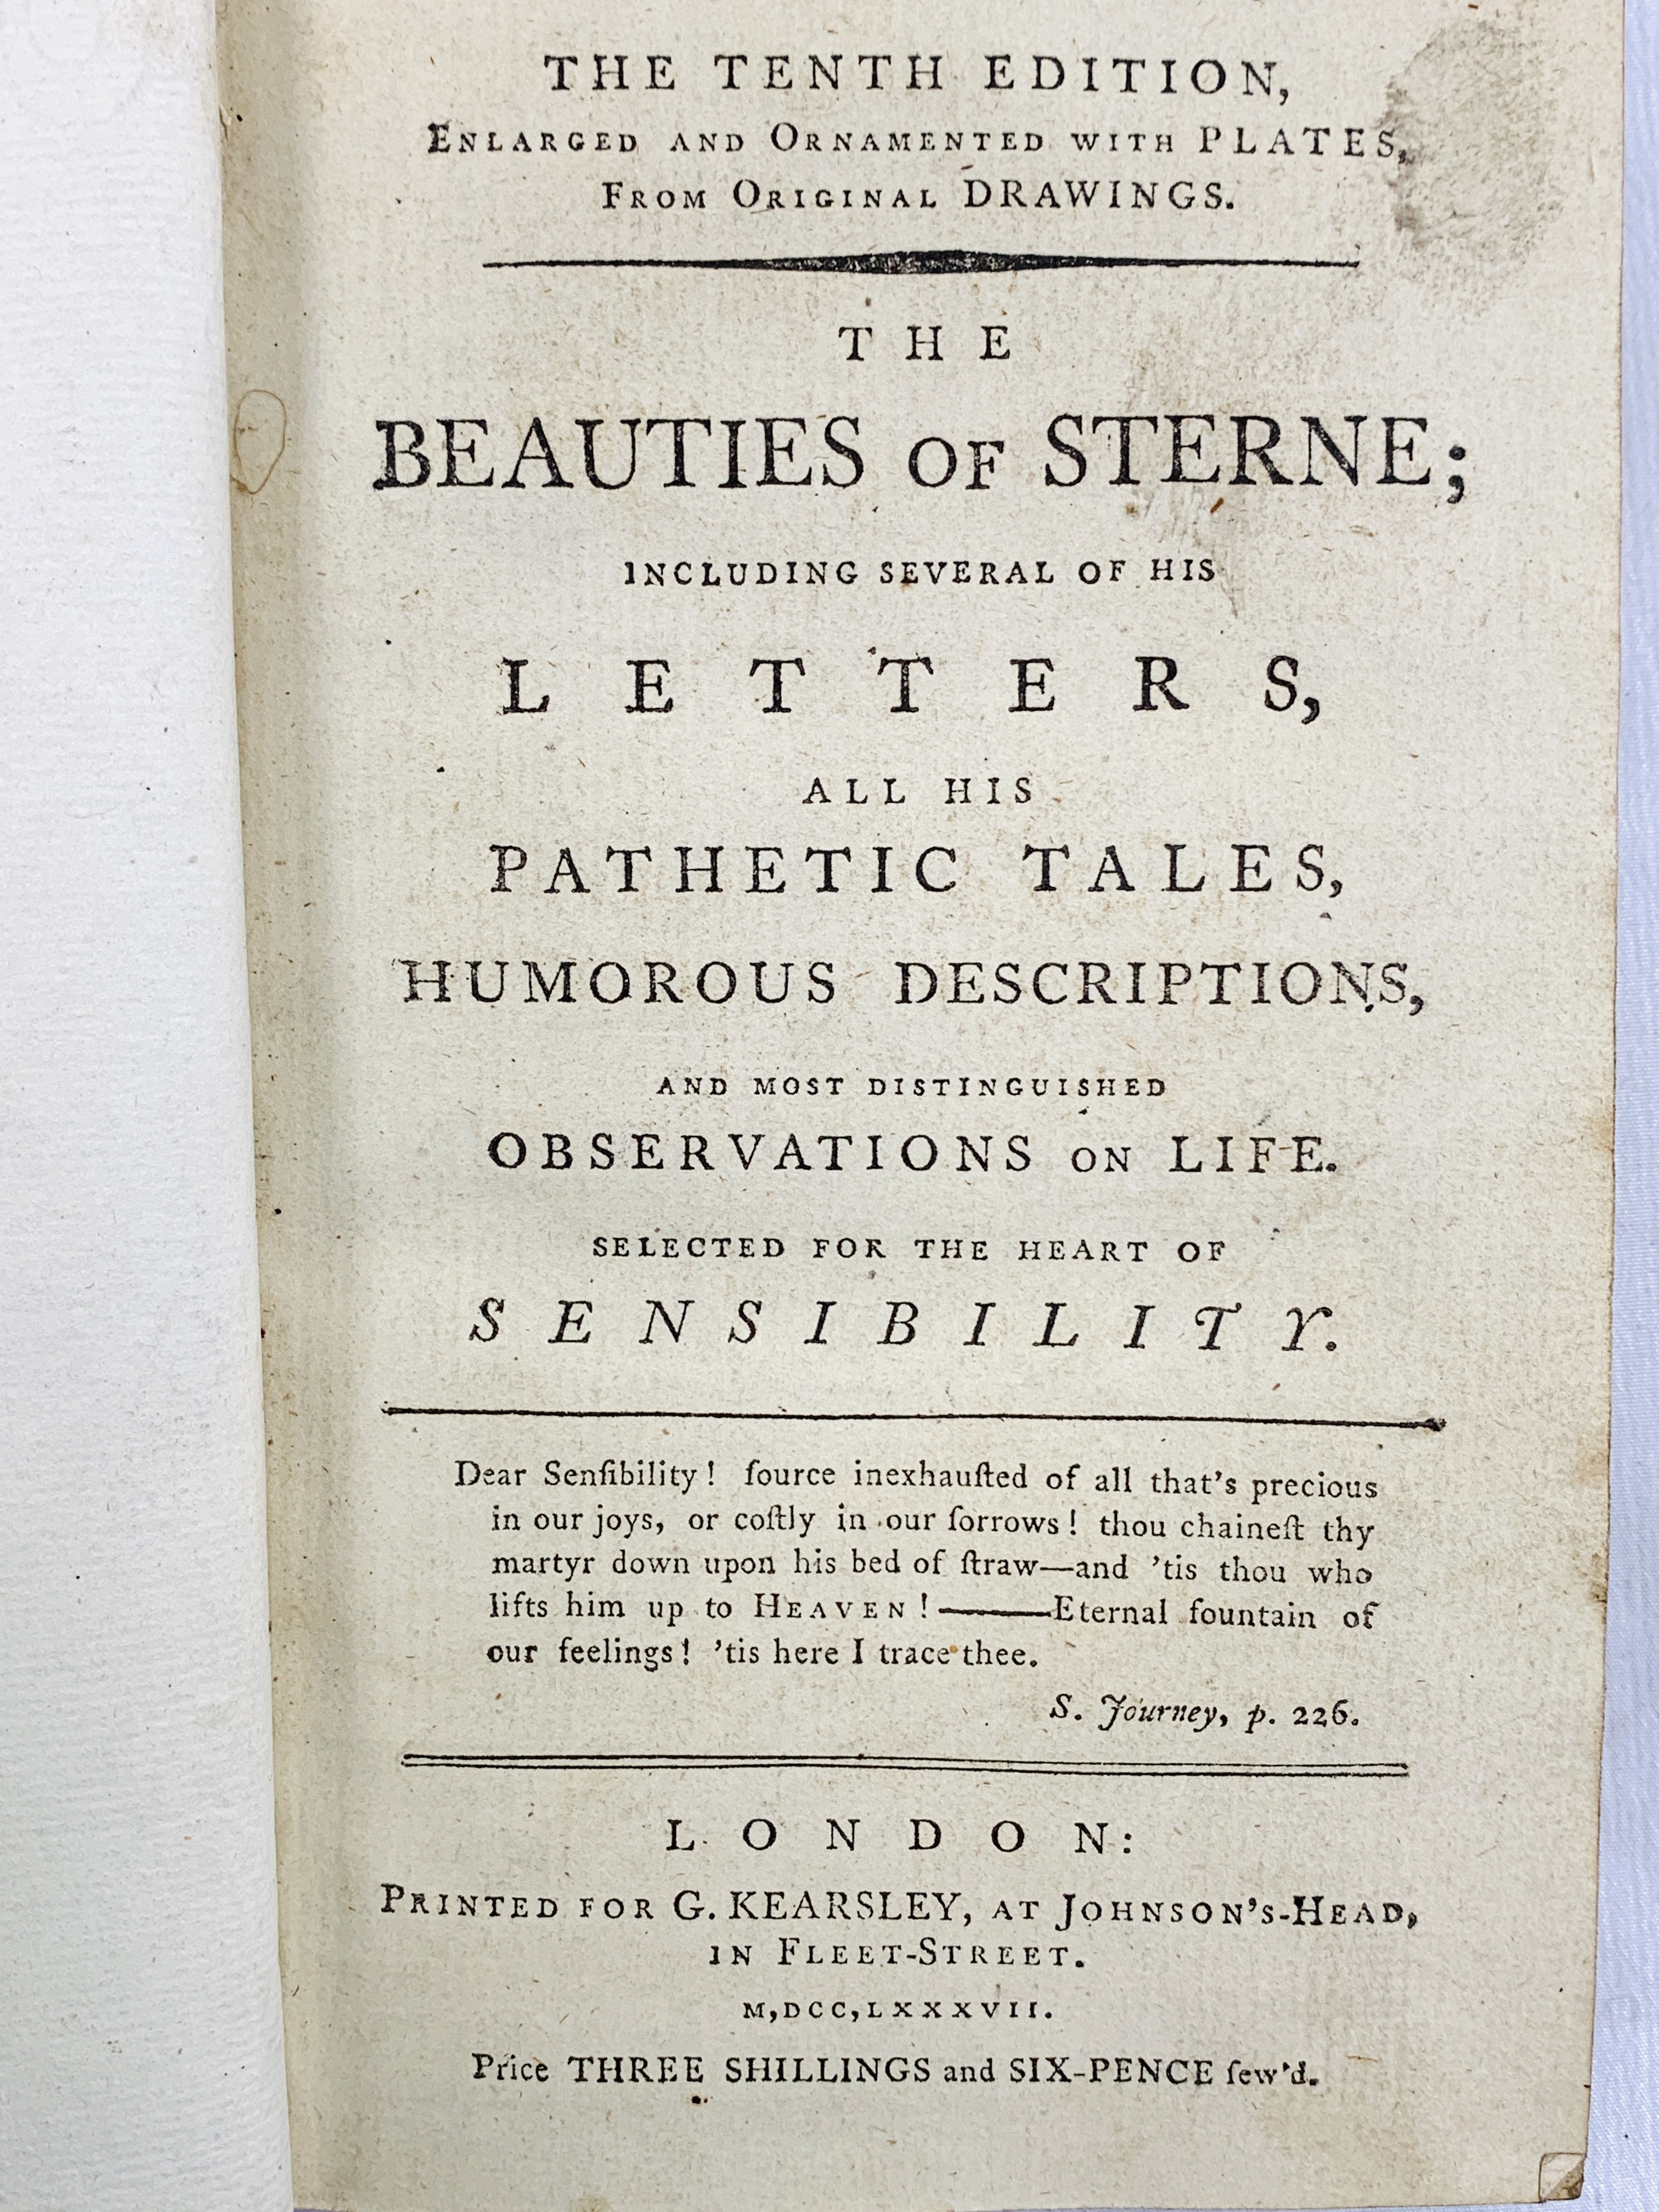 The Beauties of Sterne. Tenth edition, printed for G Kearsley, 1787 - Image 2 of 3